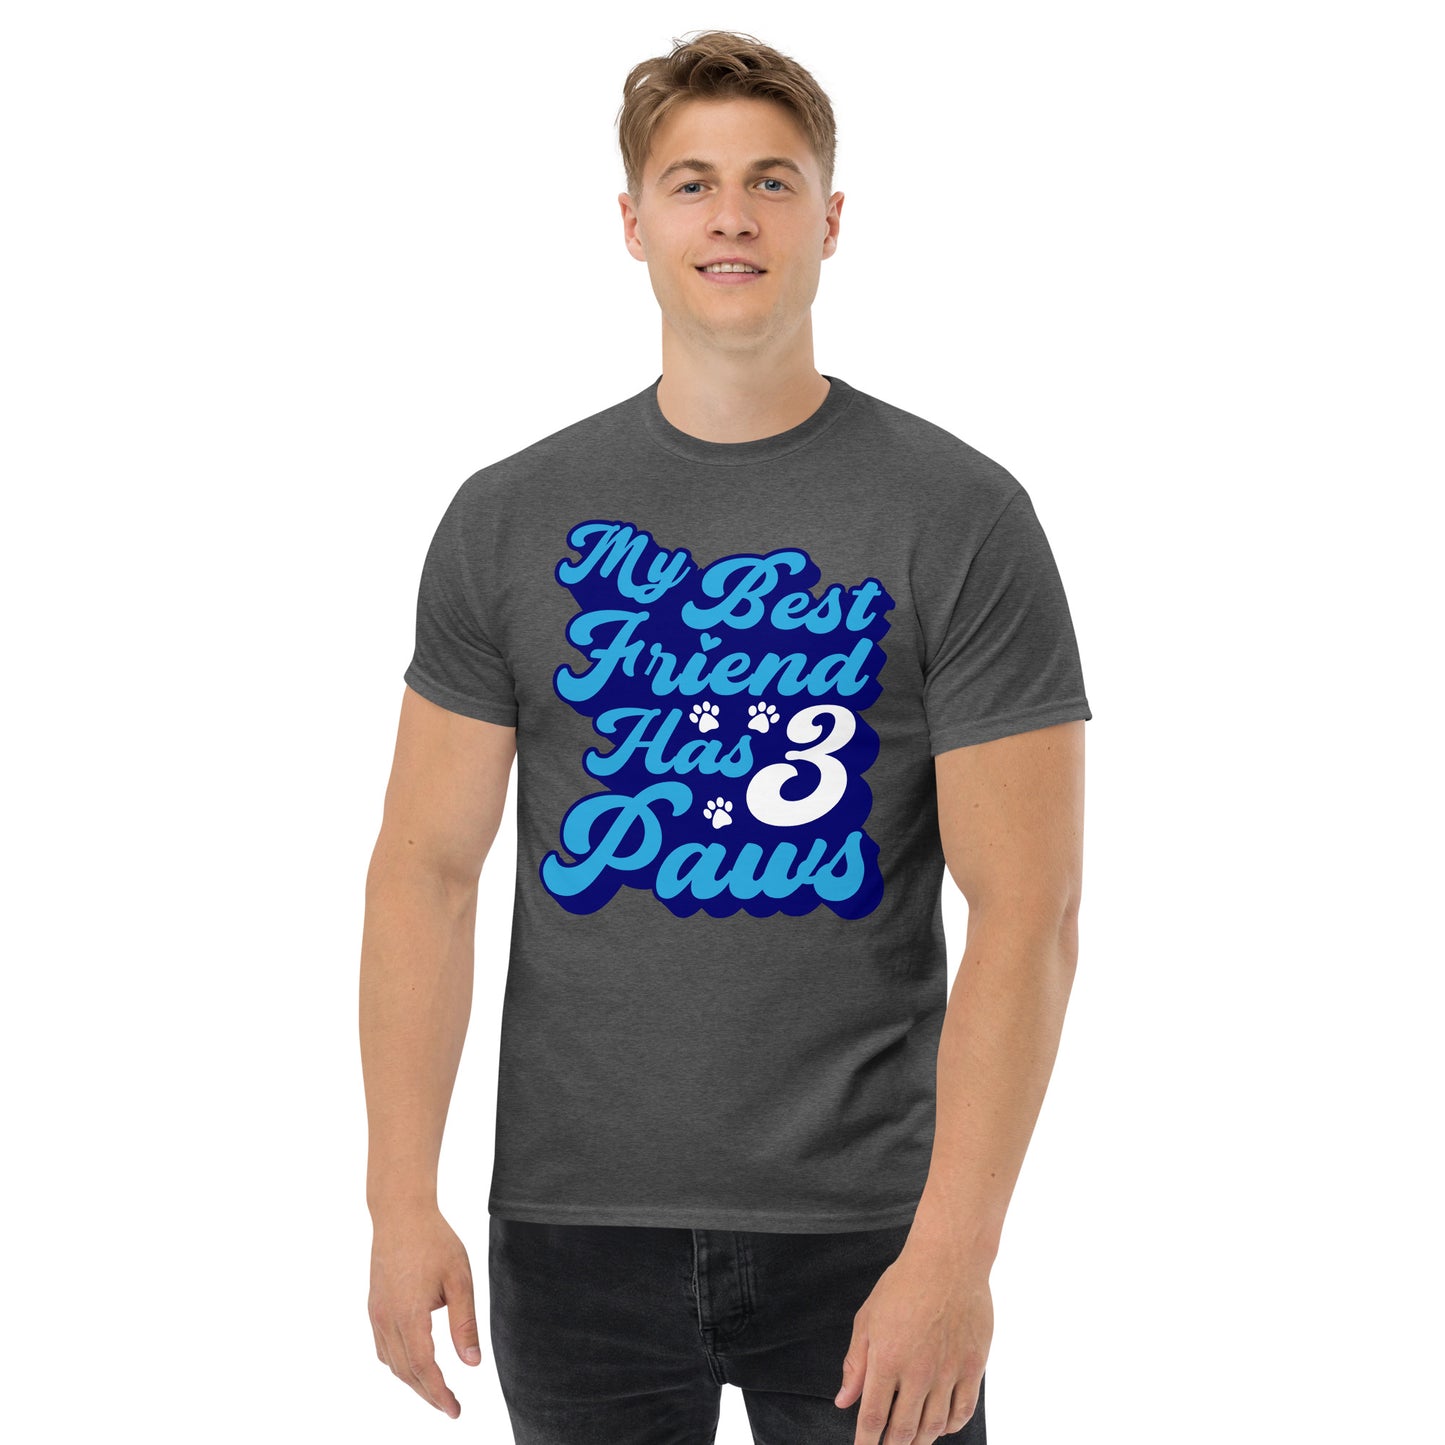 My best friend has 3 Paws men’s t-shirts by Dog Artistry heather color